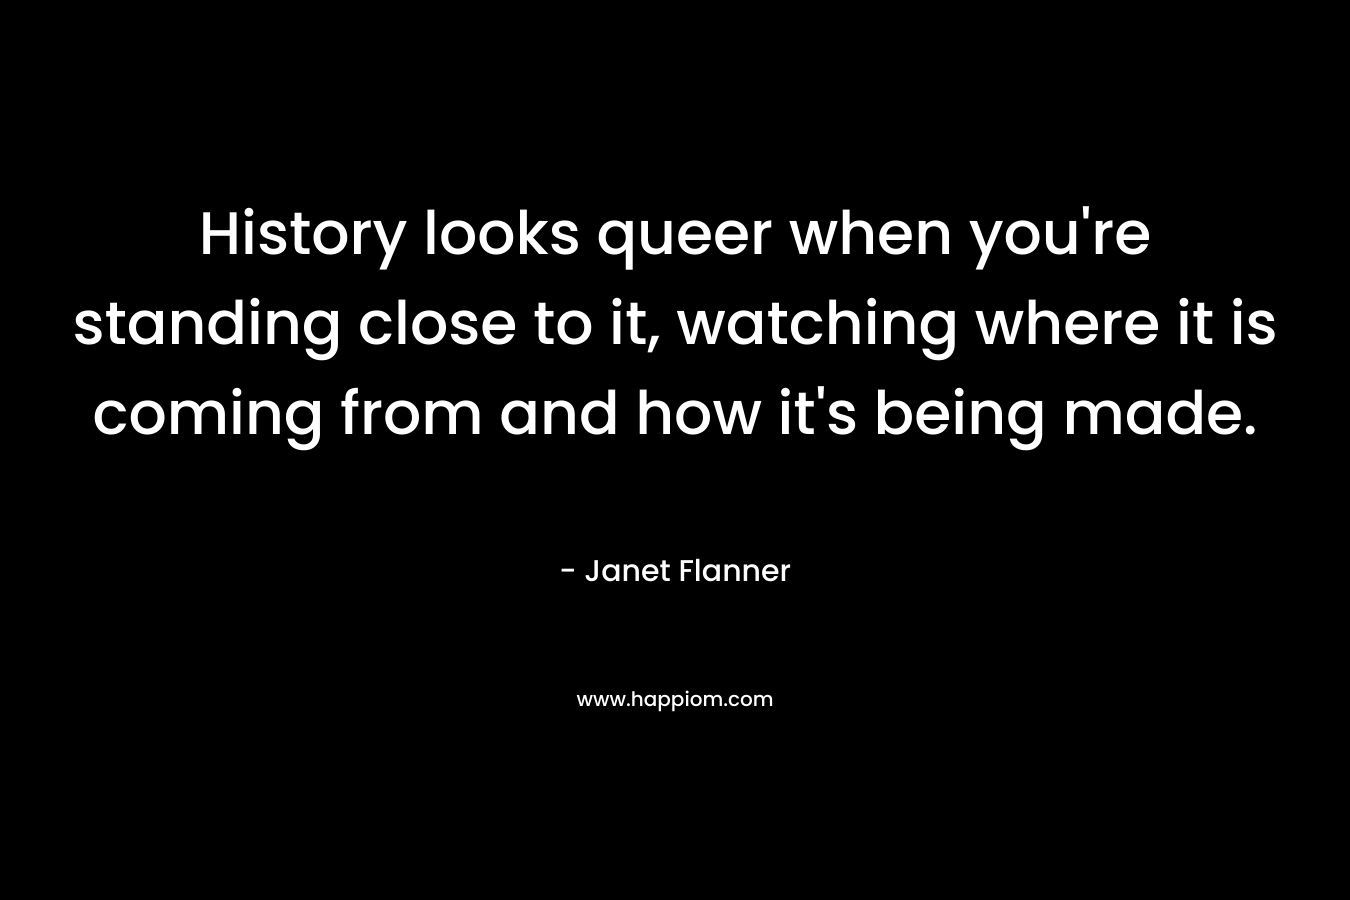 History looks queer when you’re standing close to it, watching where it is coming from and how it’s being made. – Janet Flanner